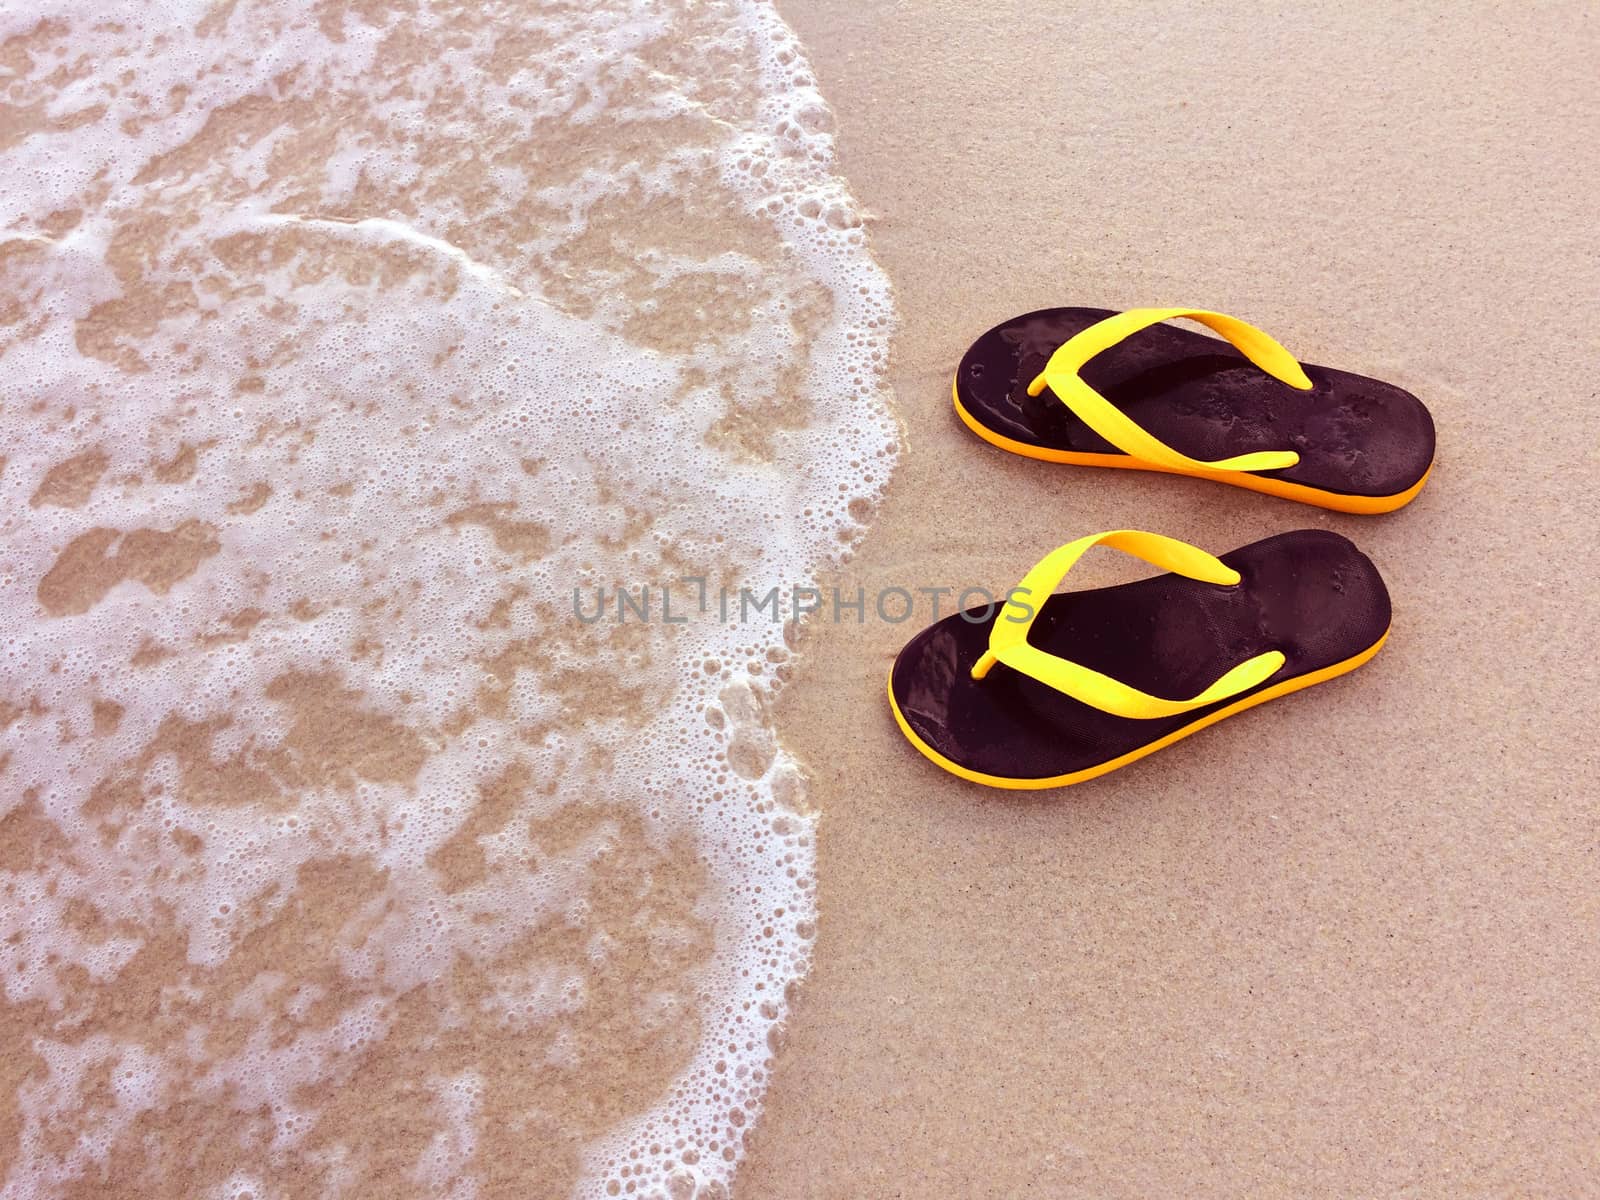 Sandals in the beach. by Bowonpat